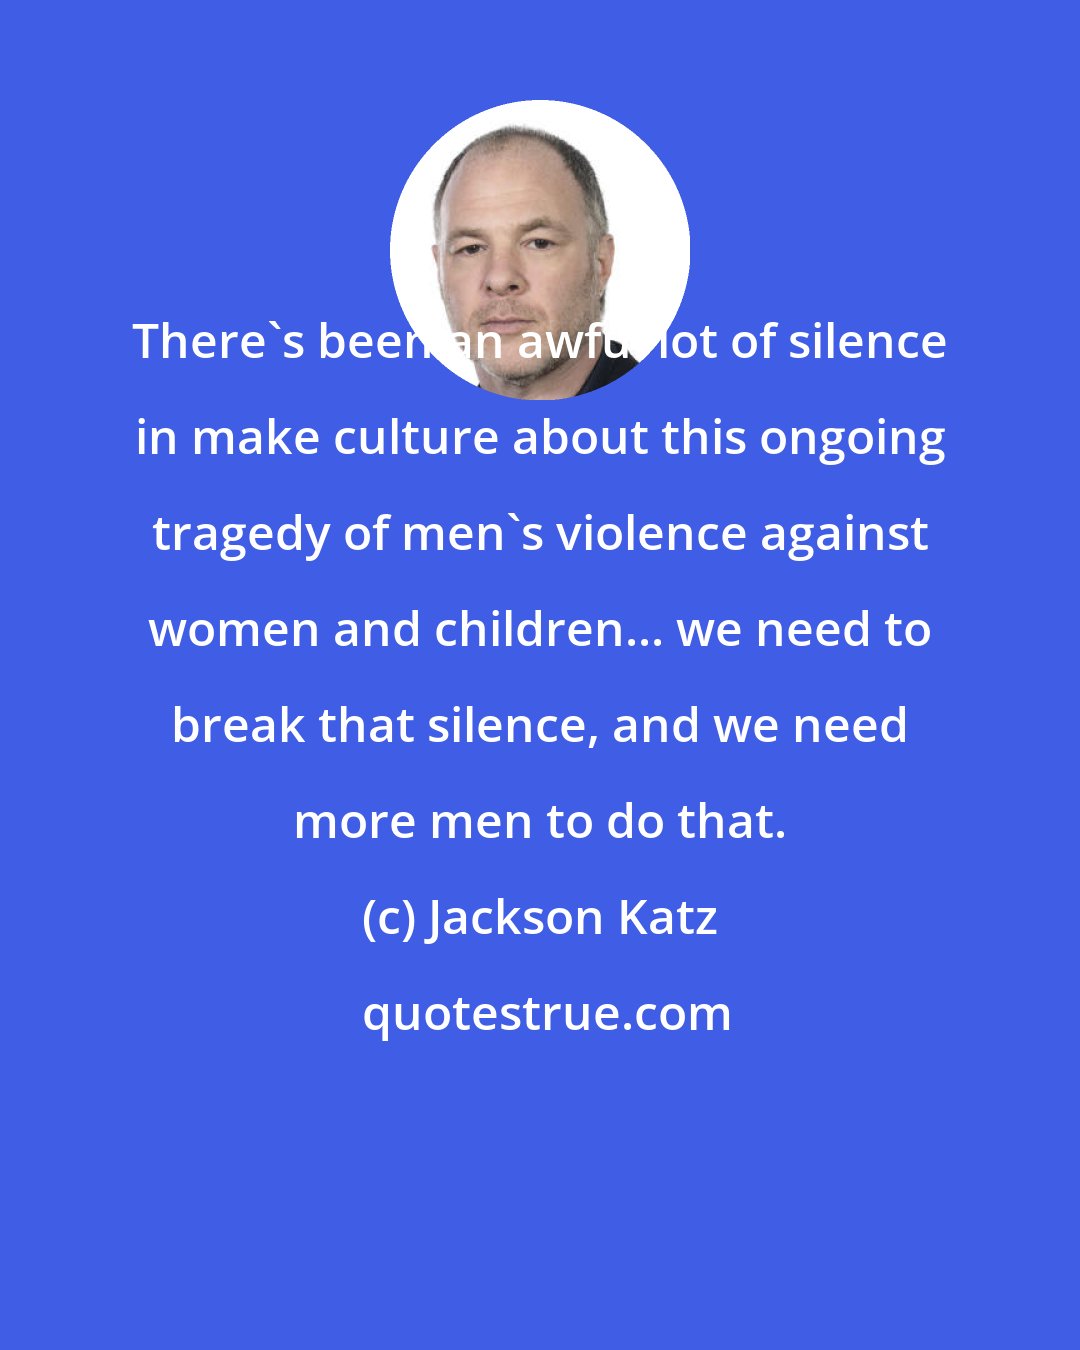 Jackson Katz: There's been an awful lot of silence in make culture about this ongoing tragedy of men's violence against women and children... we need to break that silence, and we need more men to do that.